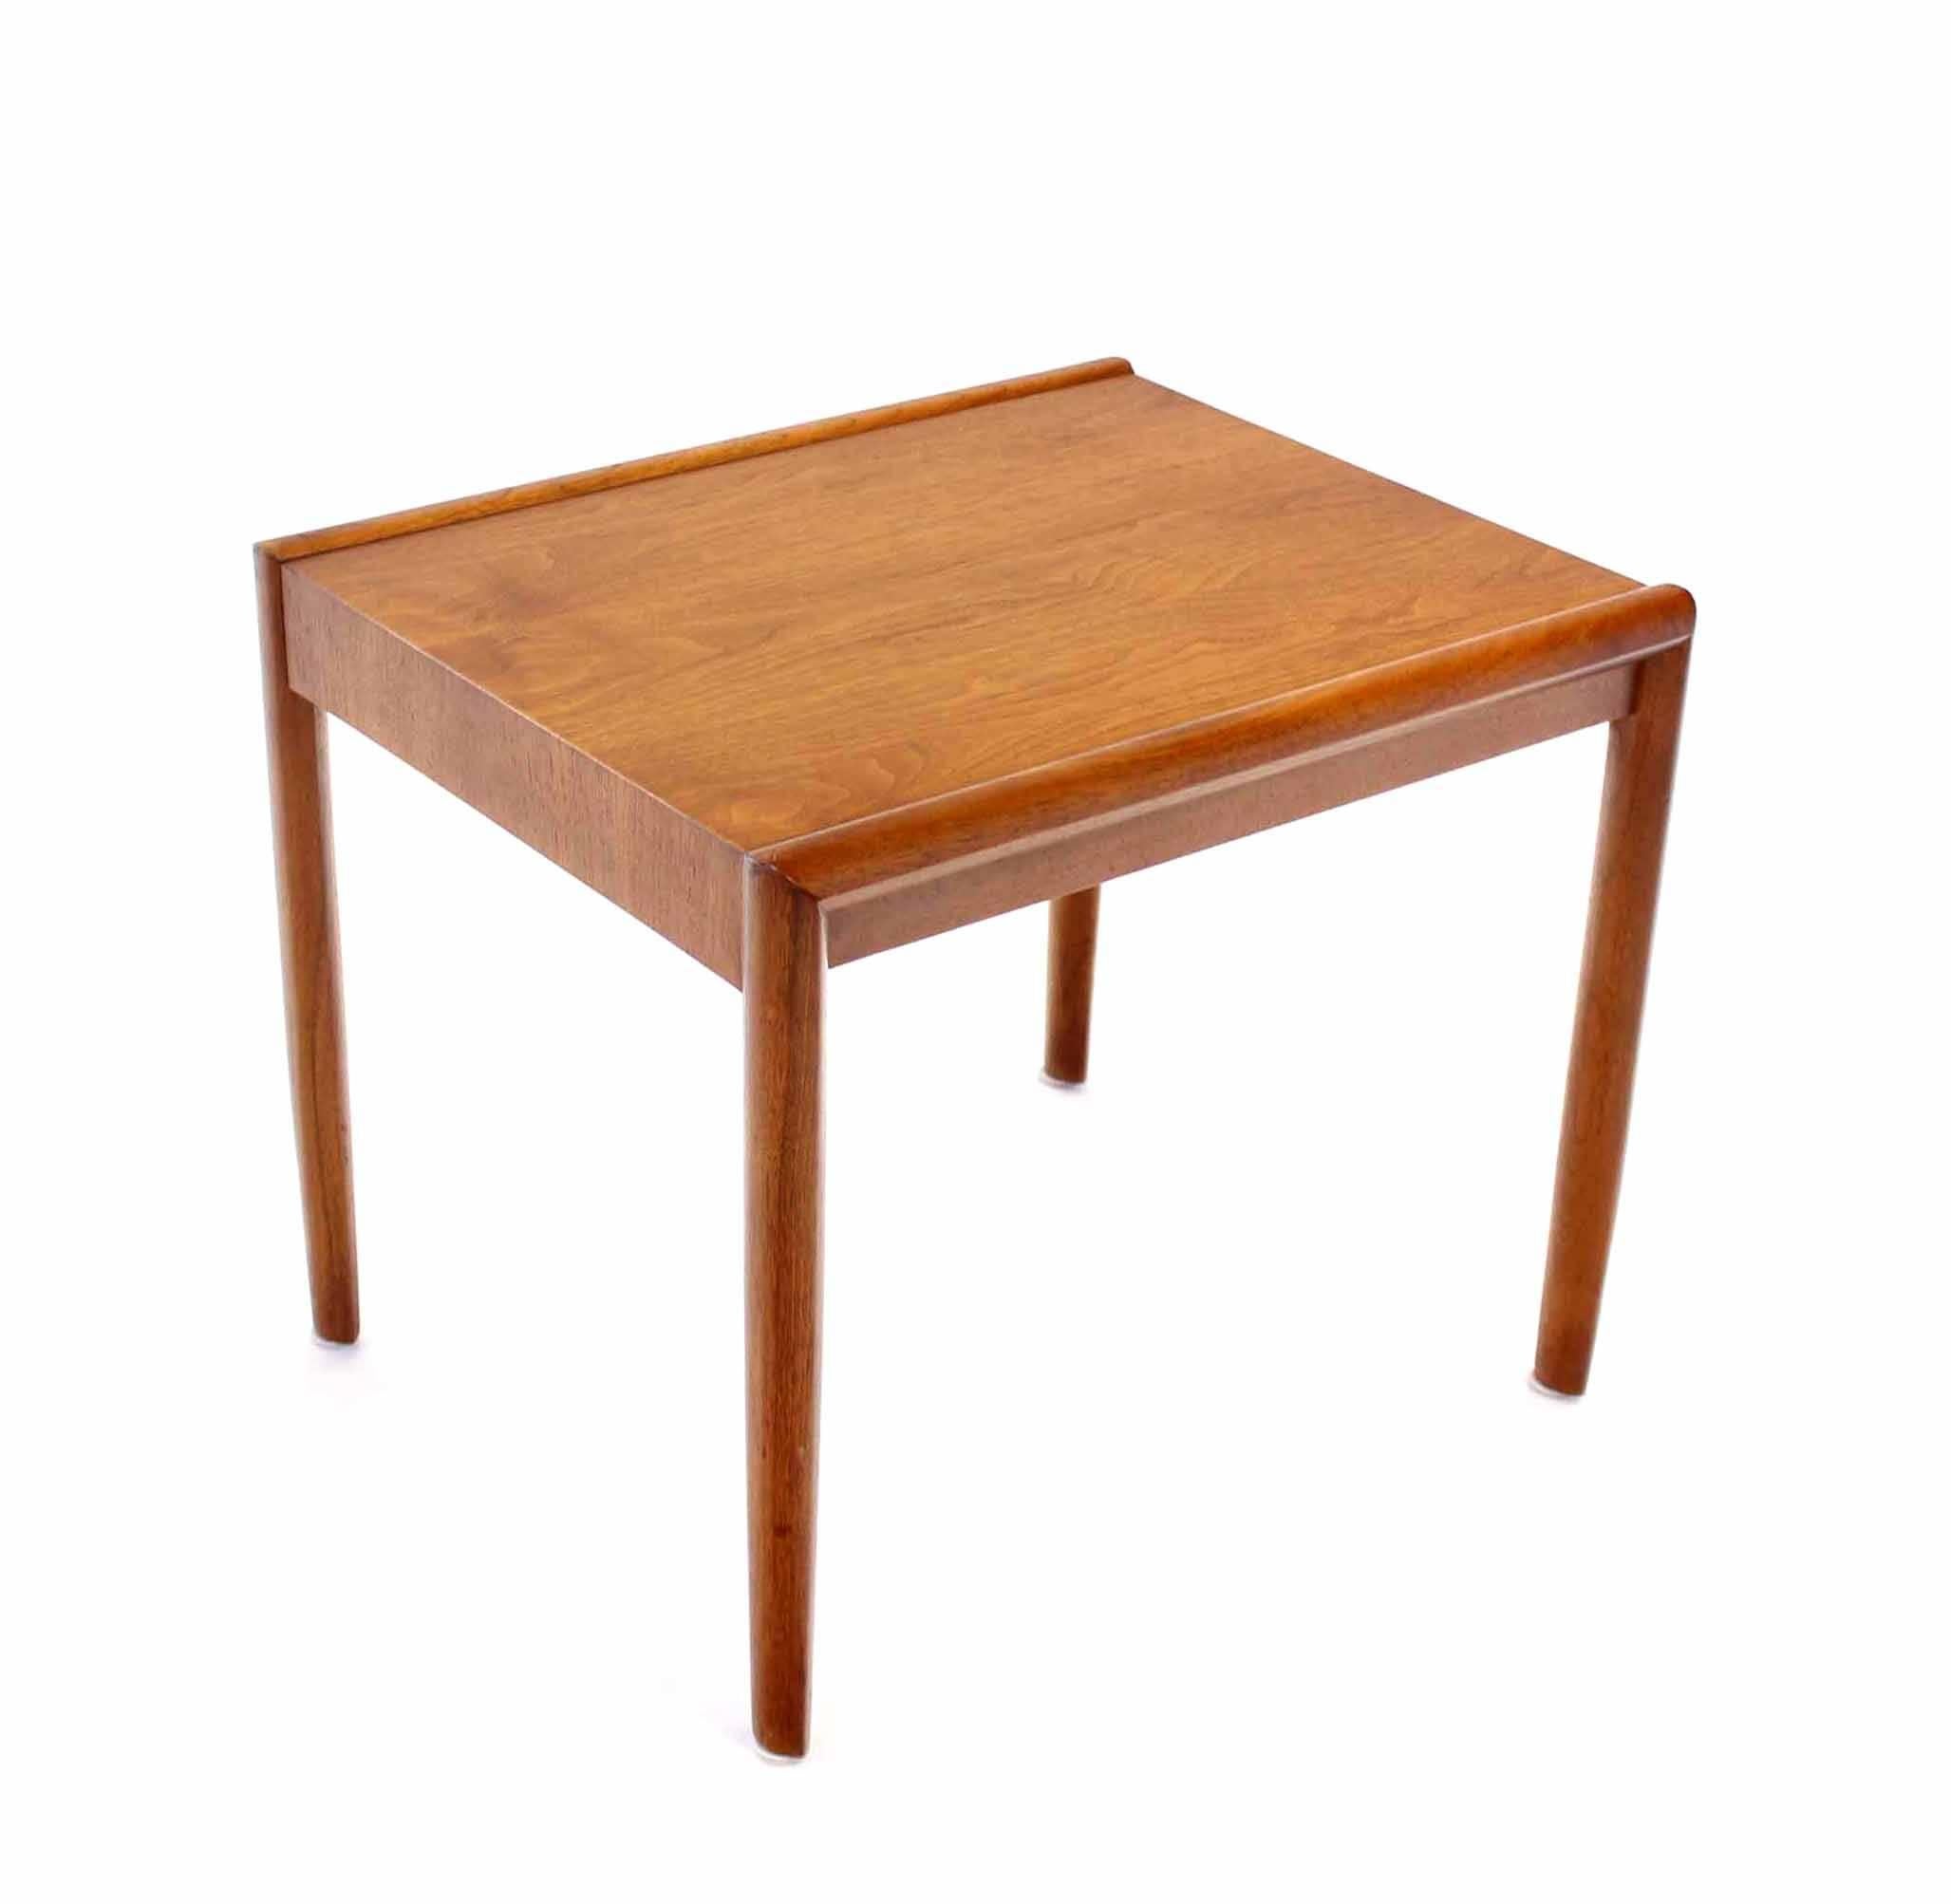 Set of Three Walnut Mid Century Modern Nesting Tables In Excellent Condition For Sale In Rockaway, NJ